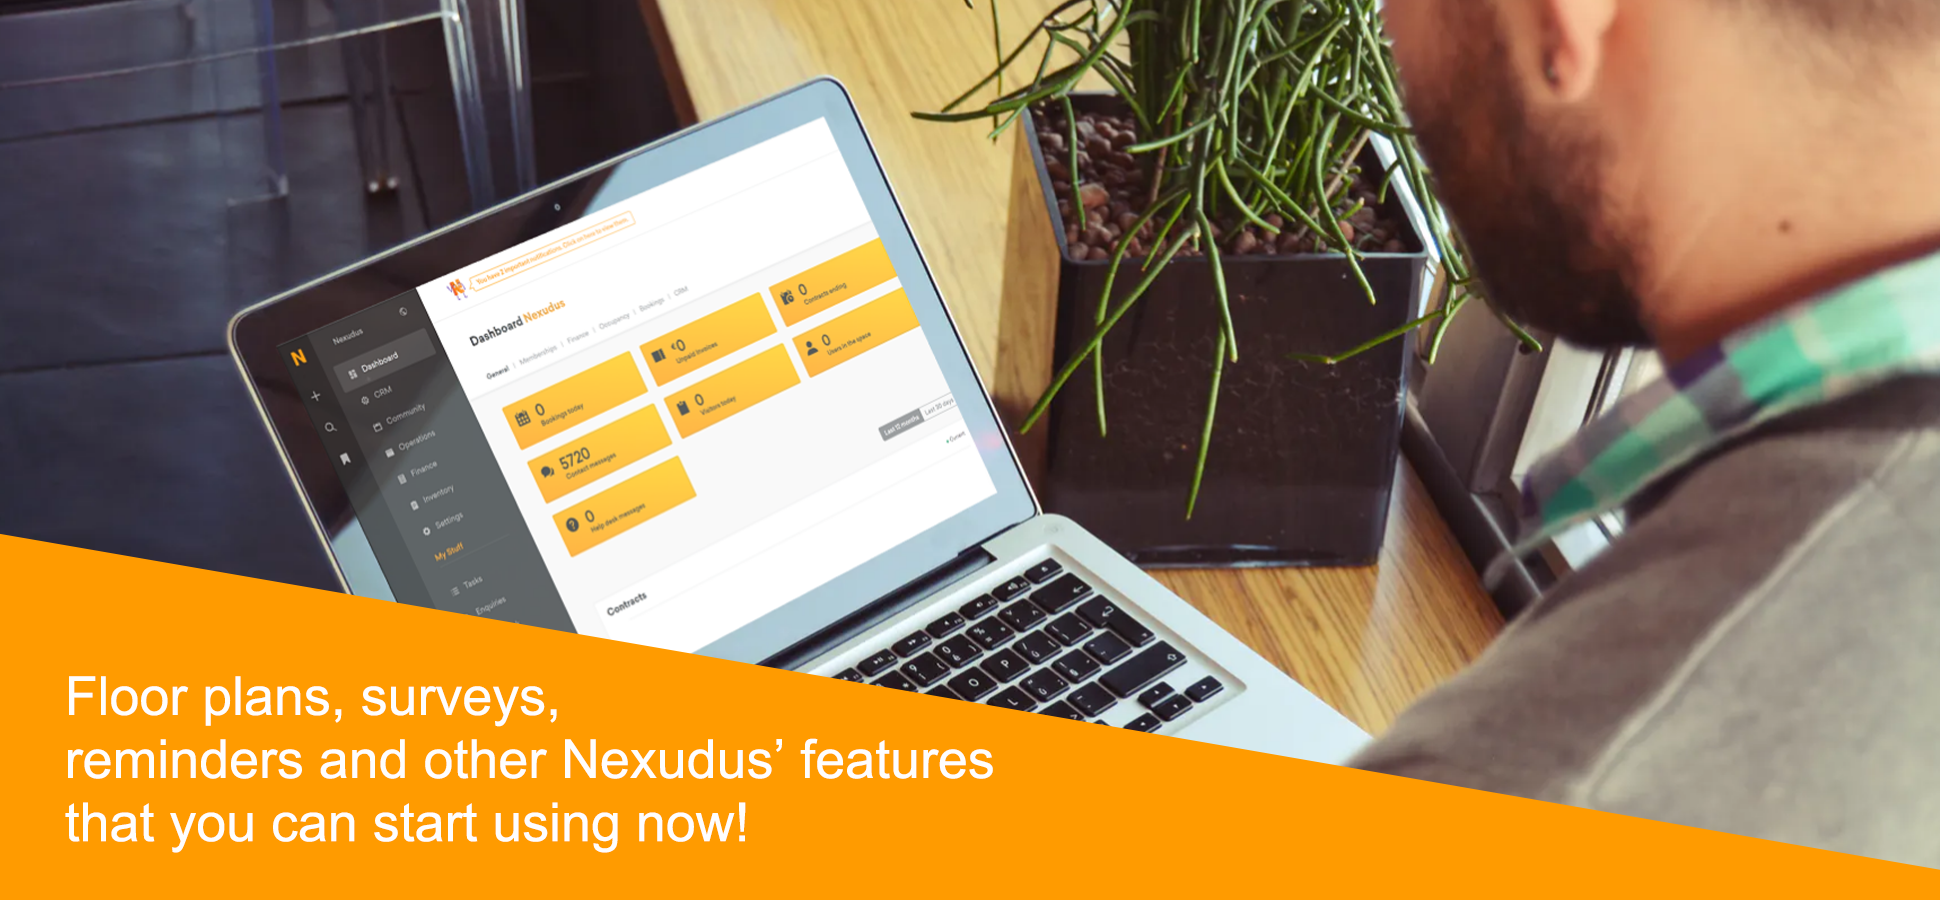 Floor plans, surveys, birthday reminders and other Nexudus' features that you can start using now!